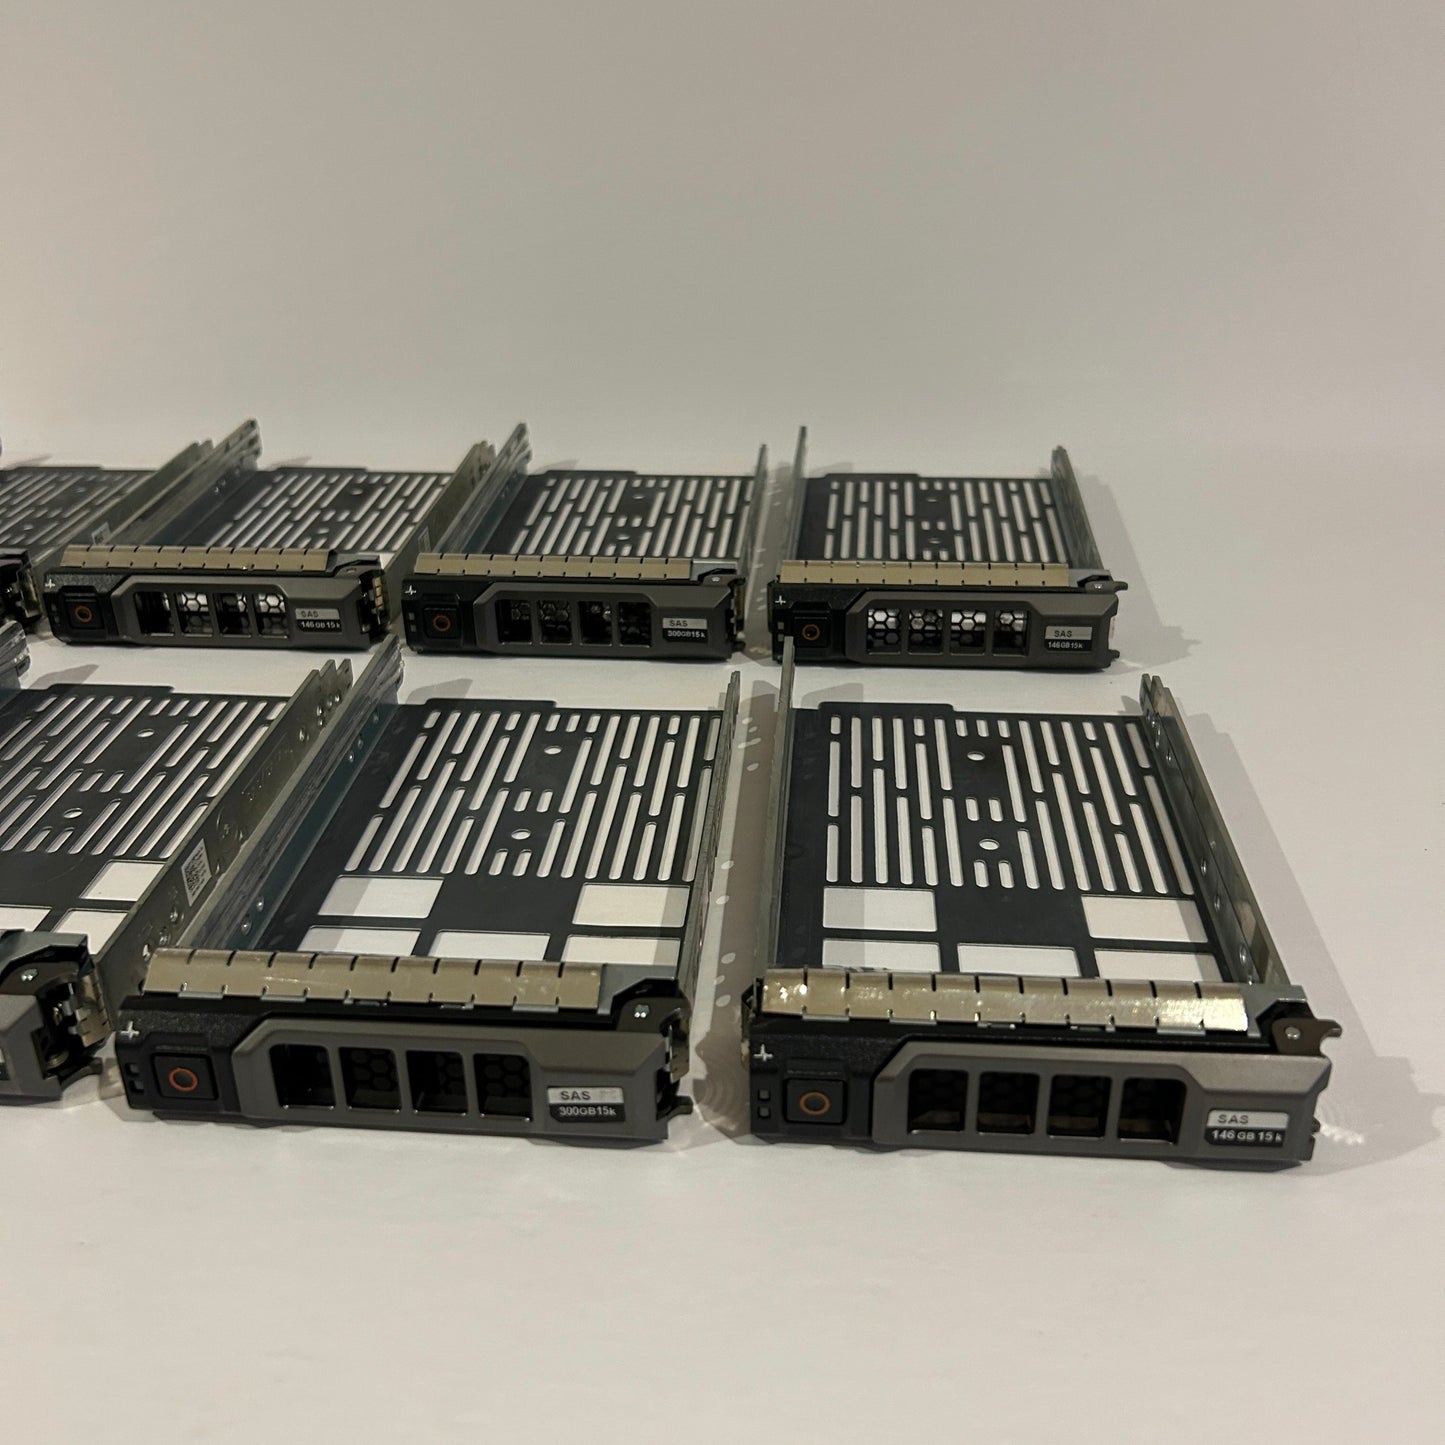 Lot of 40 - 3.5" Hard Drive Caddy Tray Sled For Dell PowerEdge